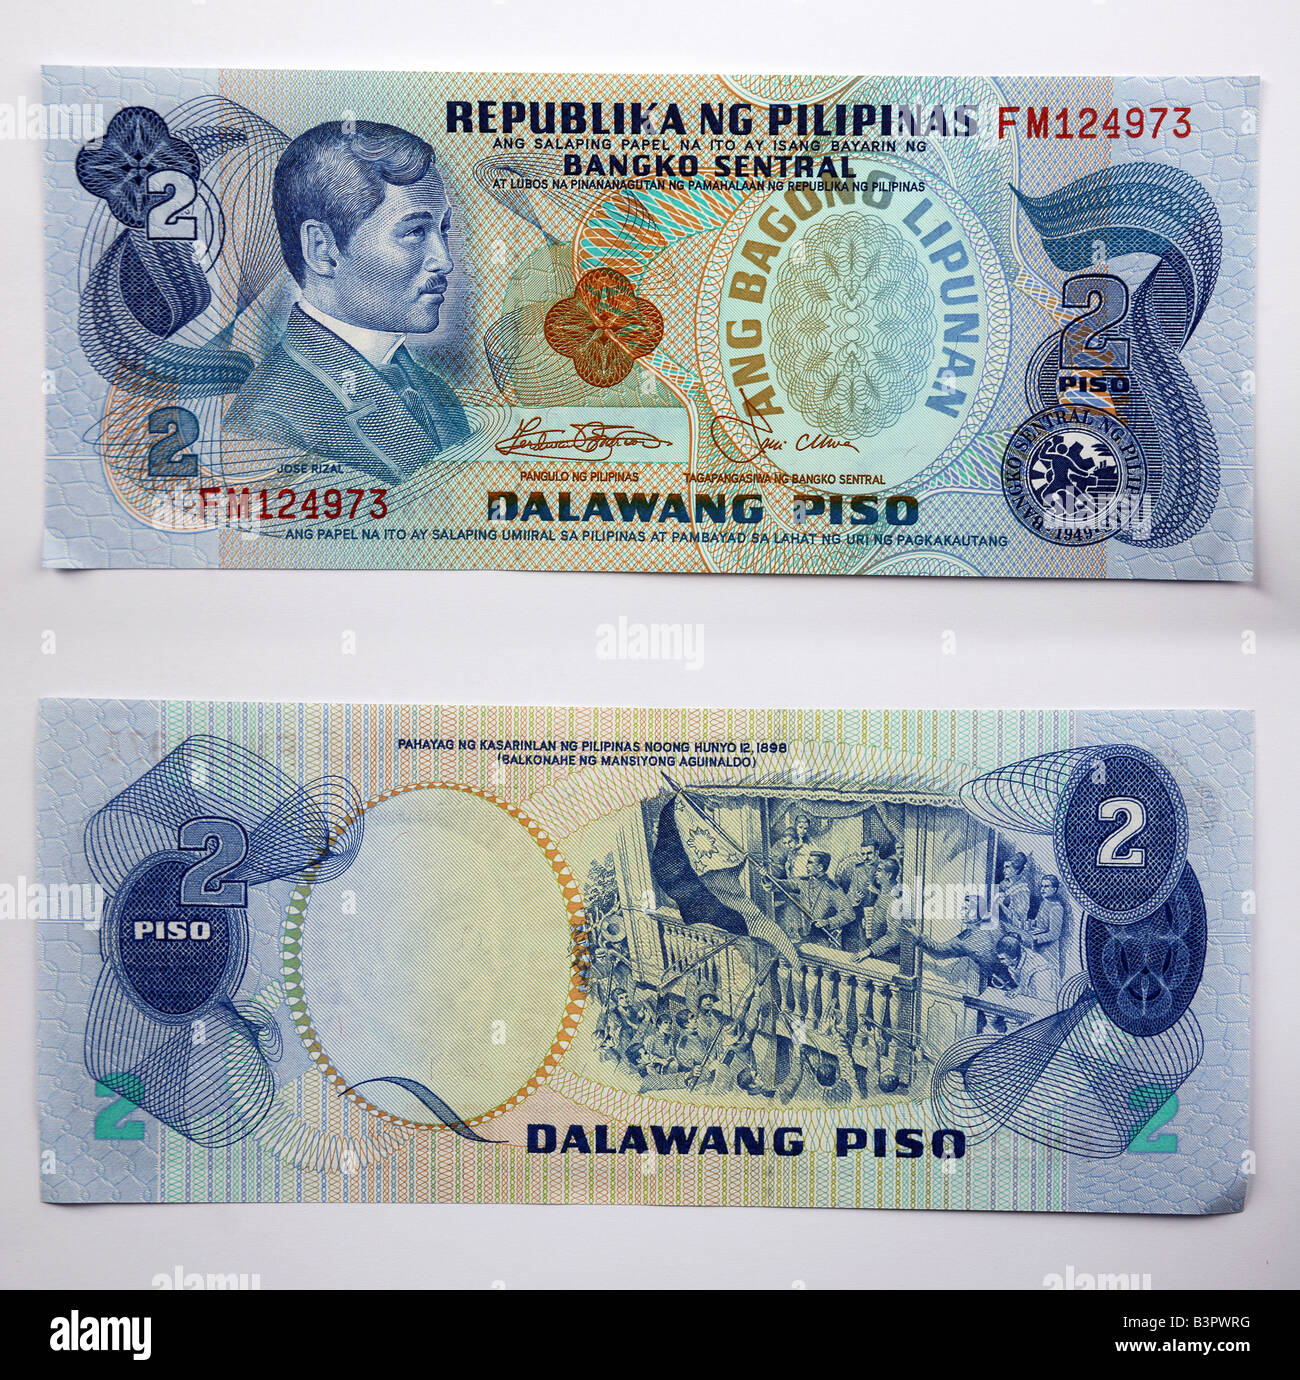 Philippine peso Currency Bank notes from Philippines Stock Photo